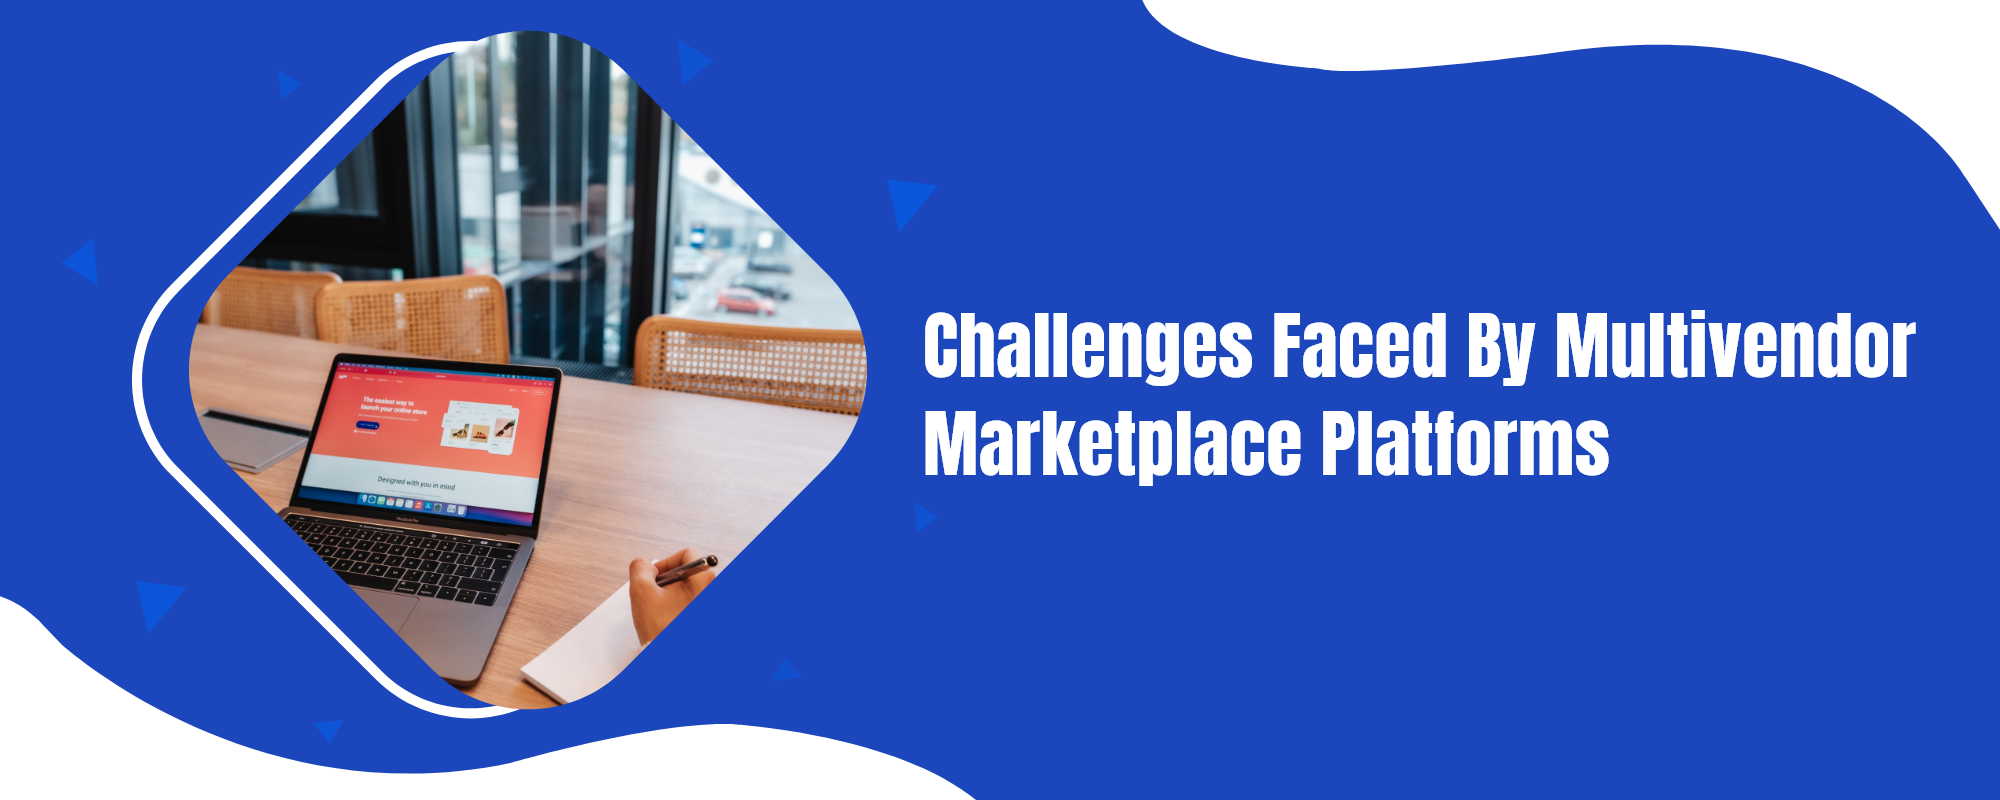 Challenges faced by multivendor marketplace platoforms